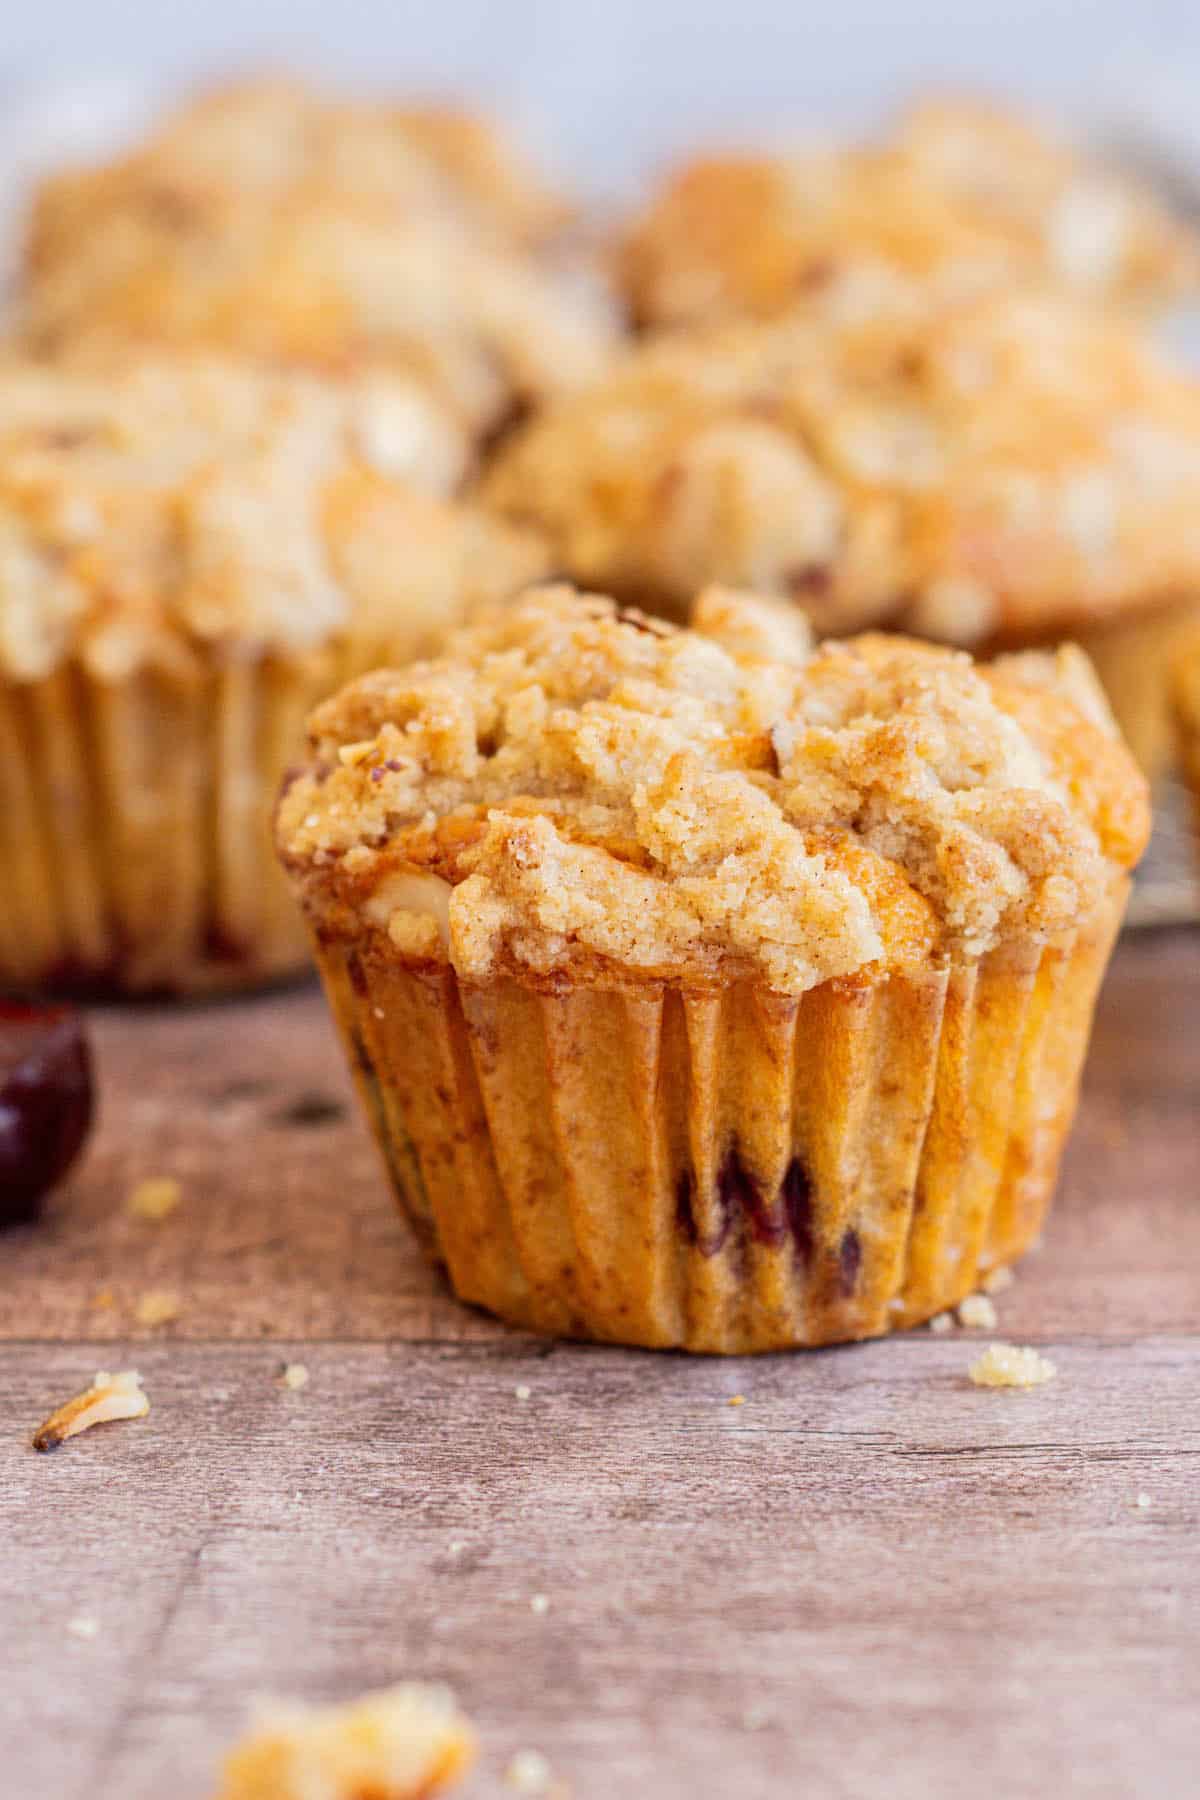 muffin with streusel topping.